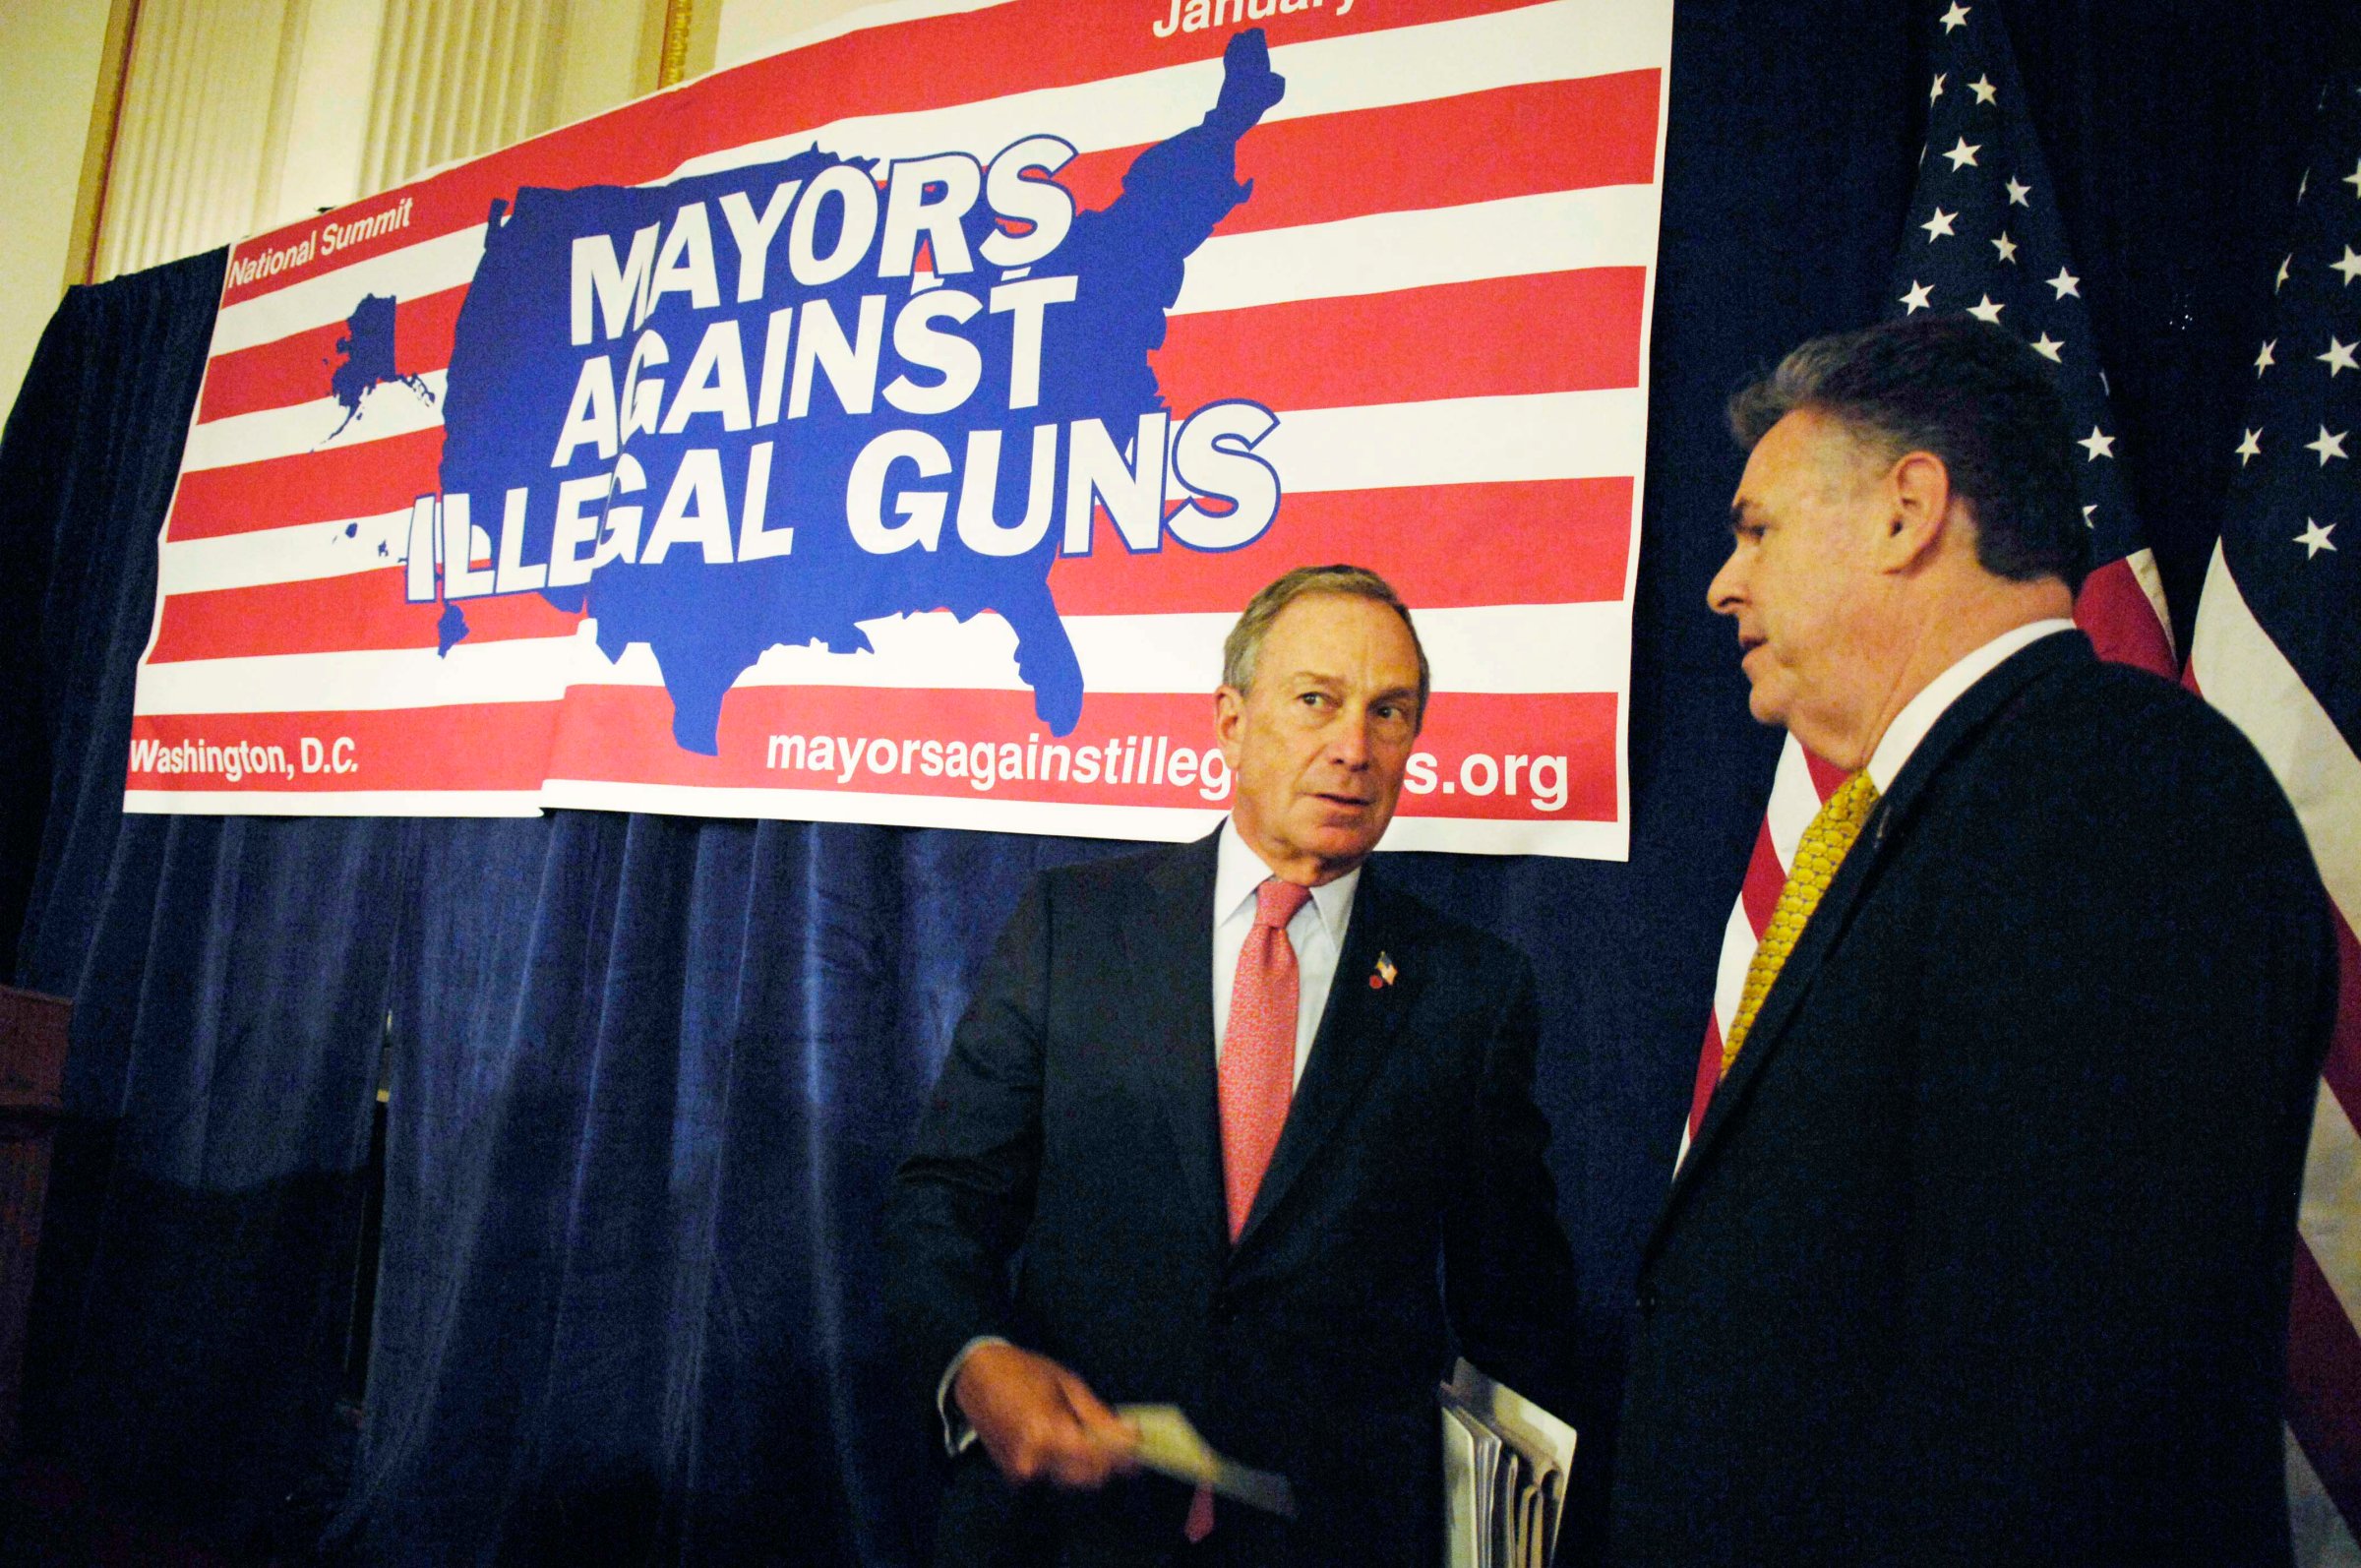 New York Mayor Michael Bloomberg with Rep. Peter T. King, R-N.Y. at a photo op in the Cannon House Office Building with mayors from around the country participating in the 2007 National Summit of Mayors Against Illegal Guns.